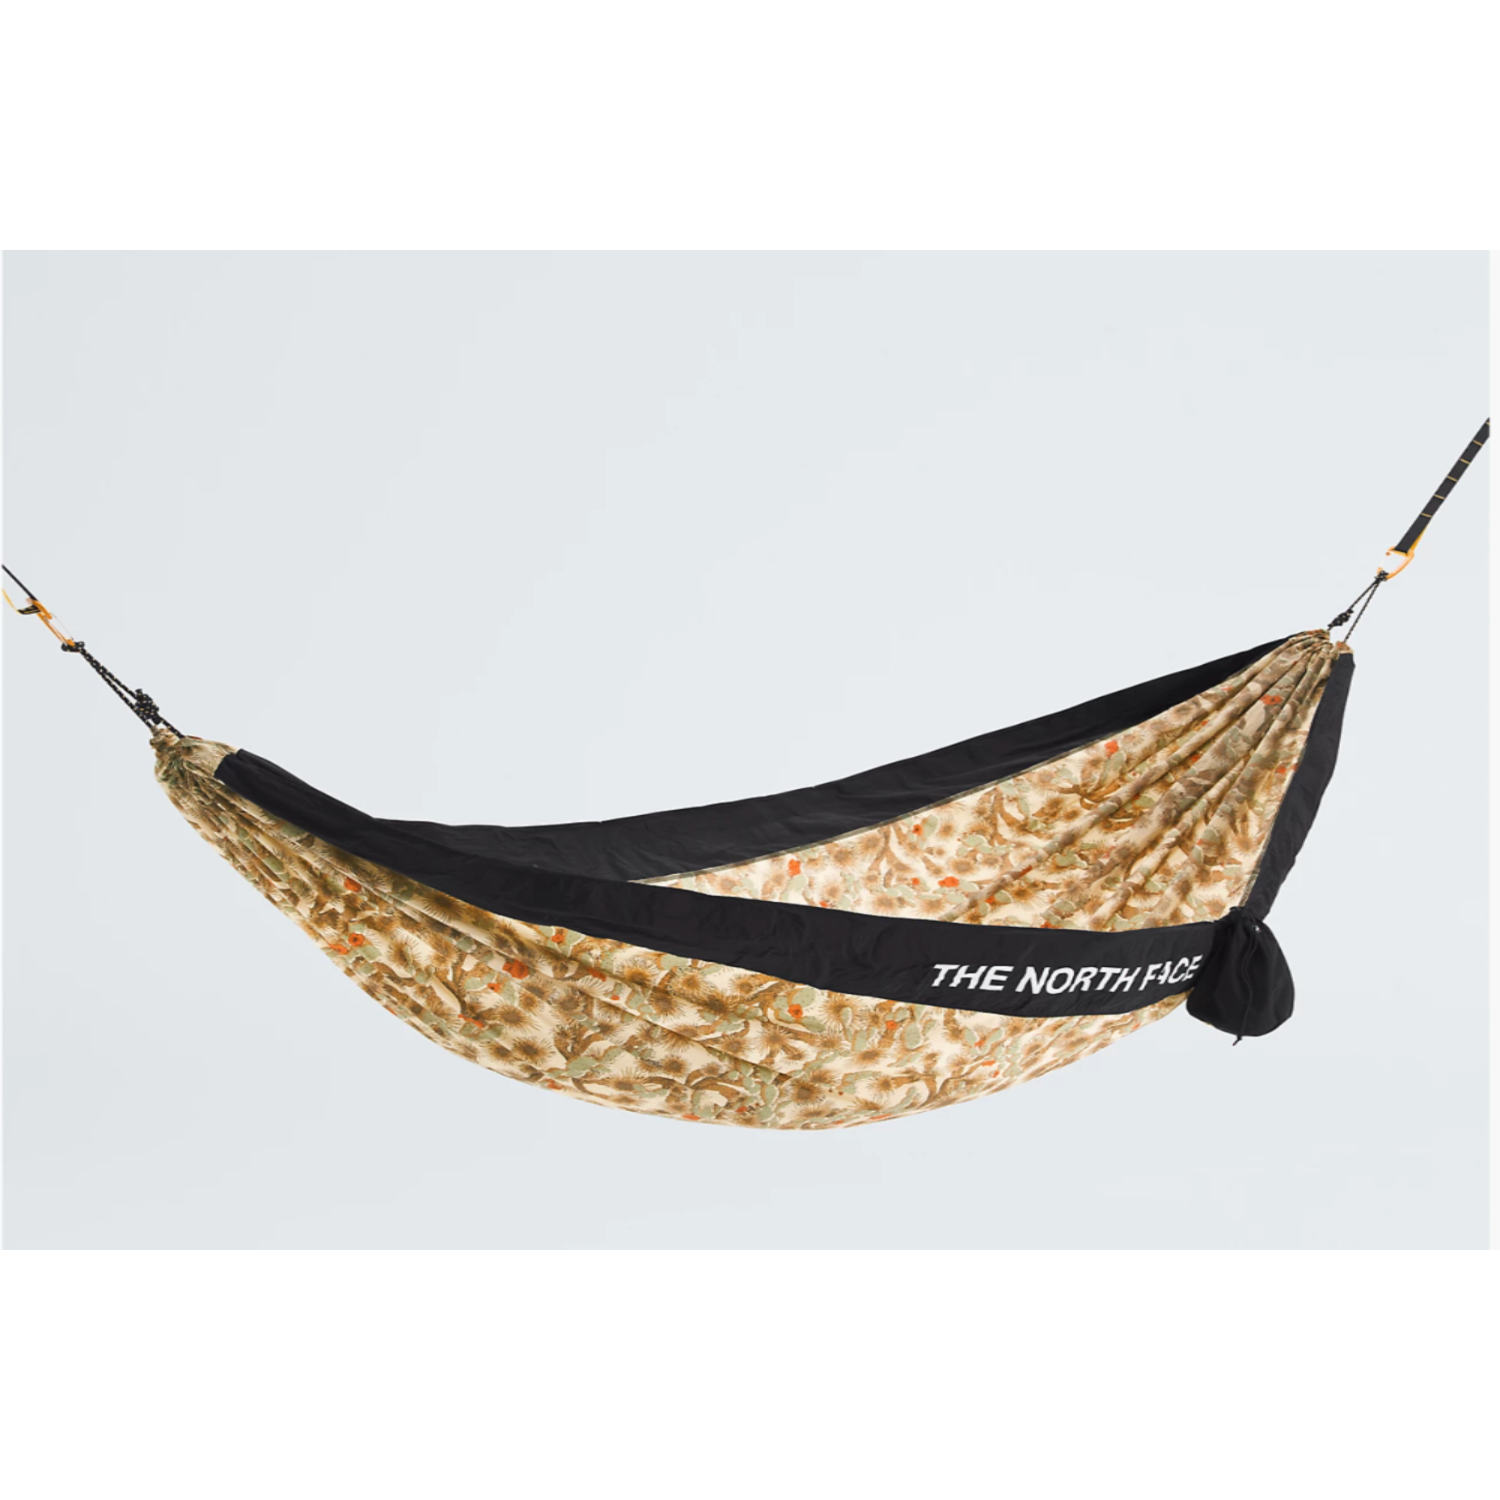 The North Face hammock summit gold opened